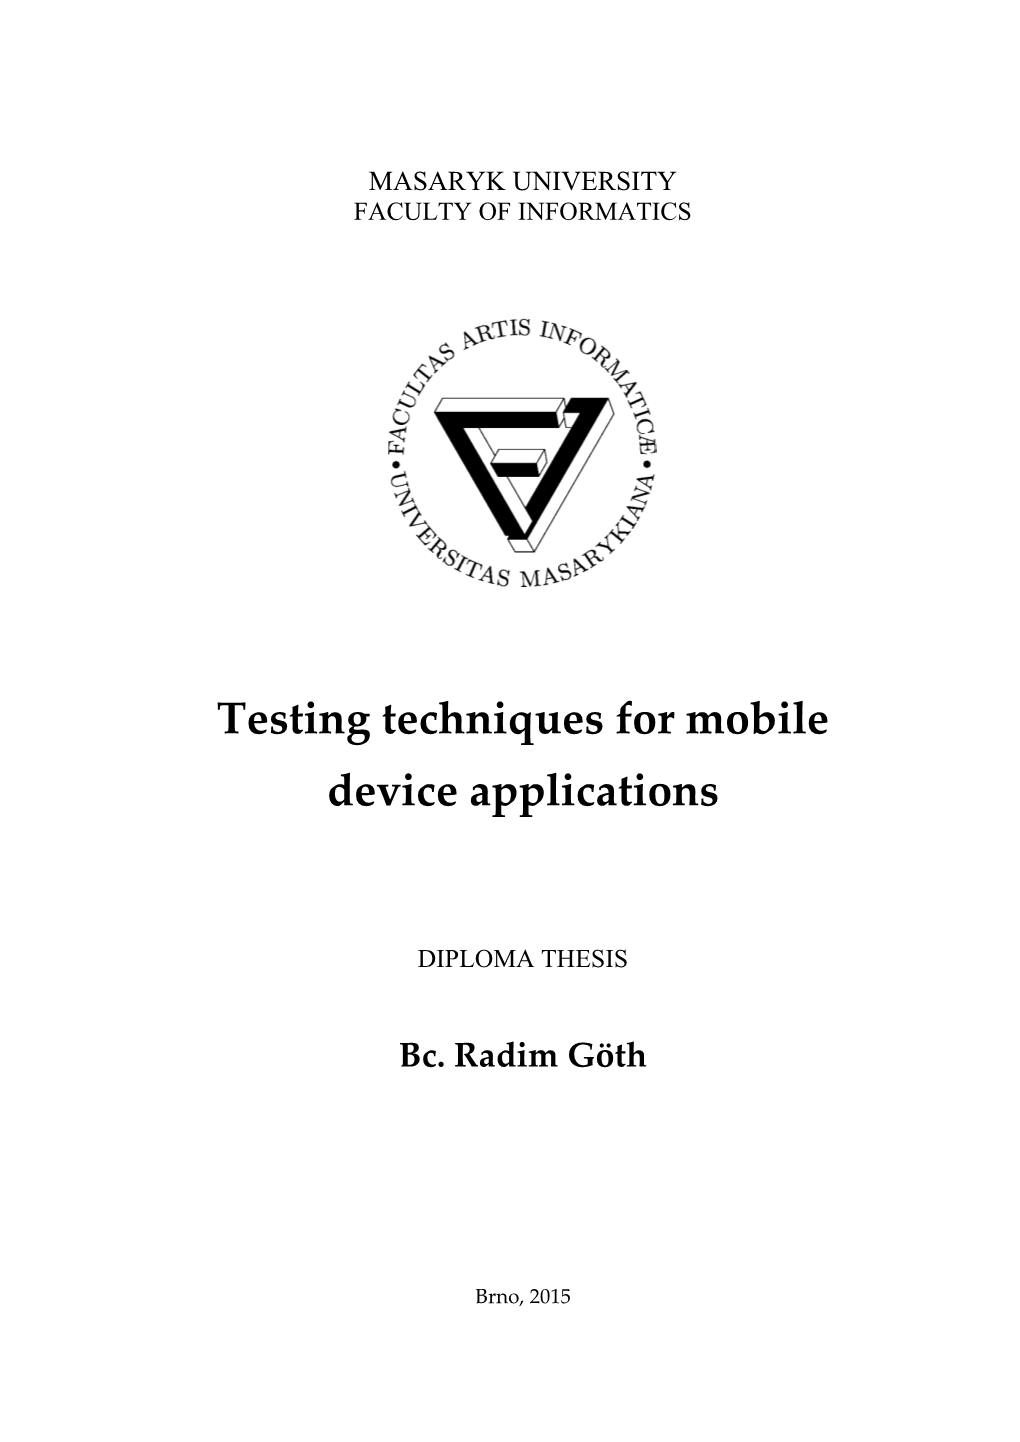 Testing Techniques for Mobile Device Applications